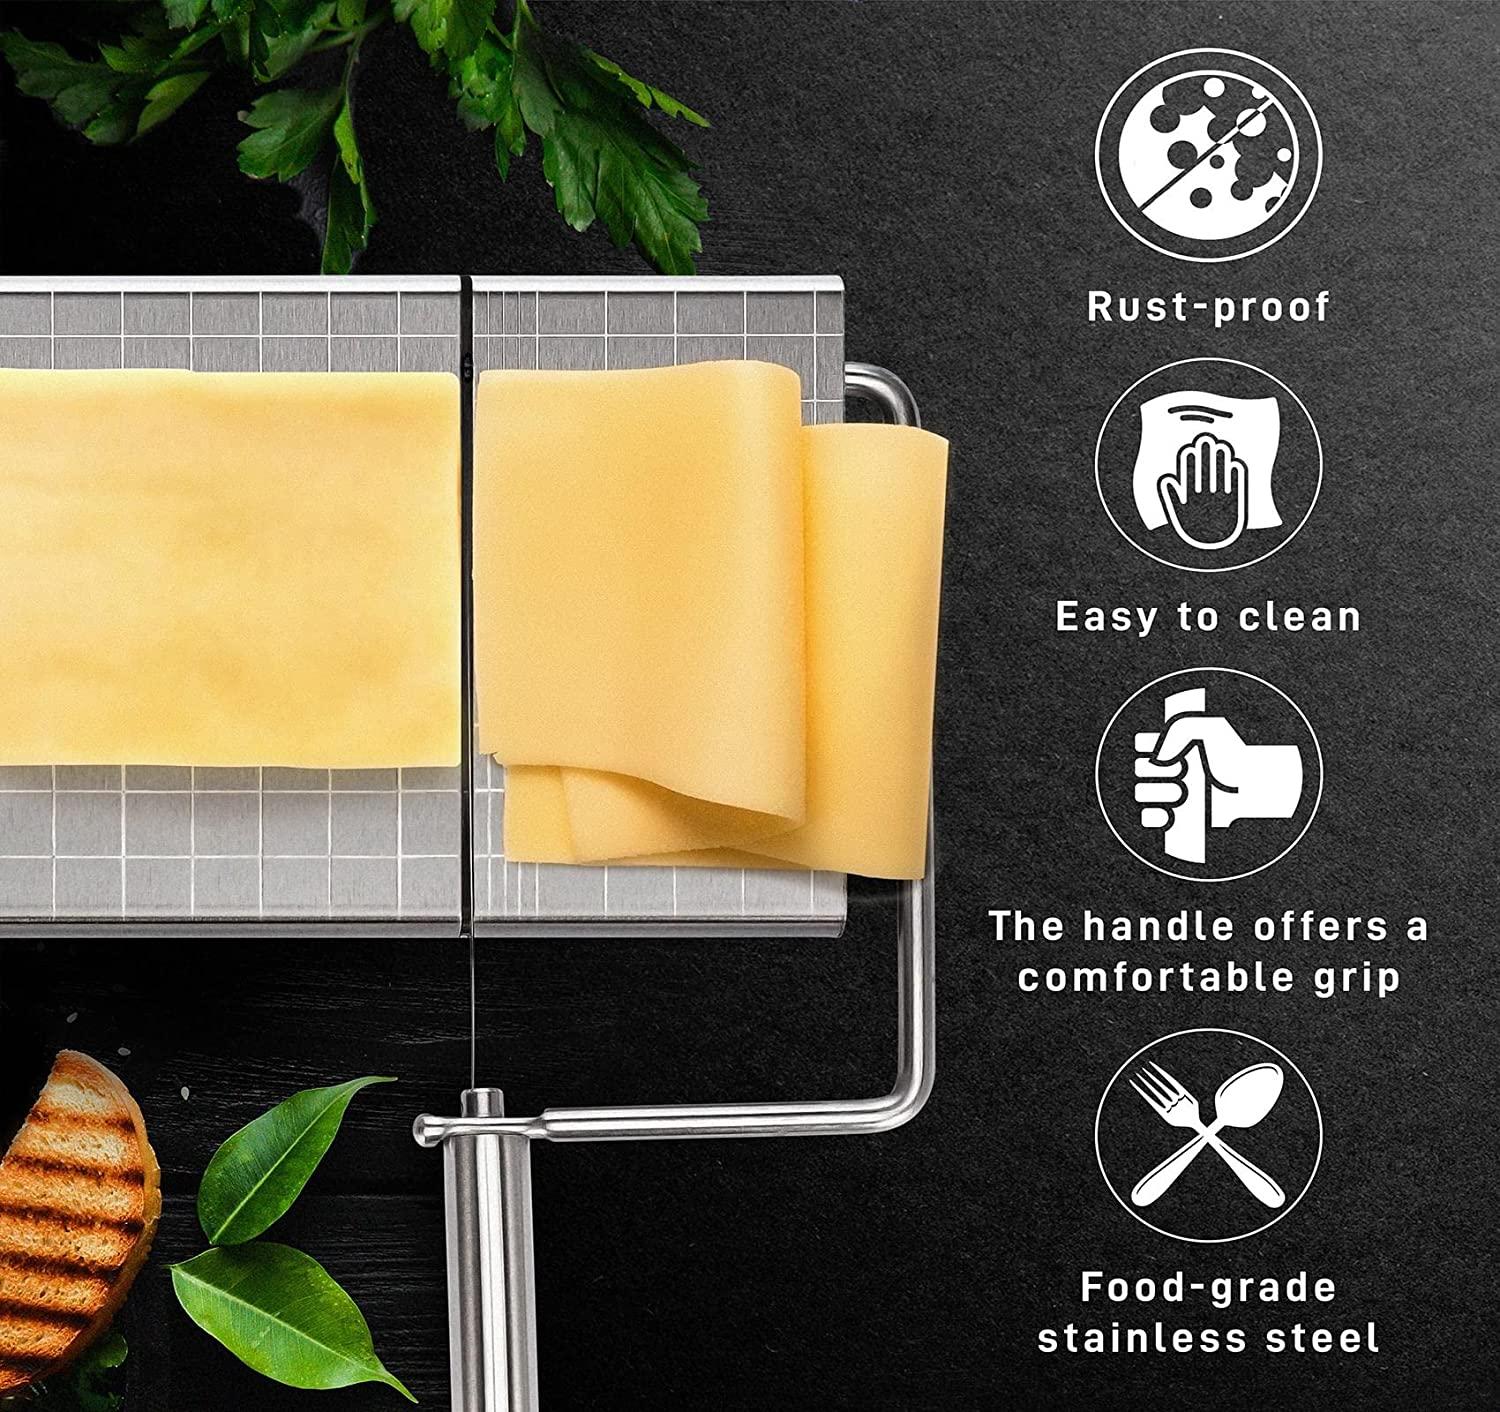  Cheese Slicer With Wire - Cheese Slicers for Block Cheese Incl.  8 Extra Wires with Accurate Size Scale On Cheese Slicer Board for Prices  Cuts - Ideal Cheese Cutter with Wire